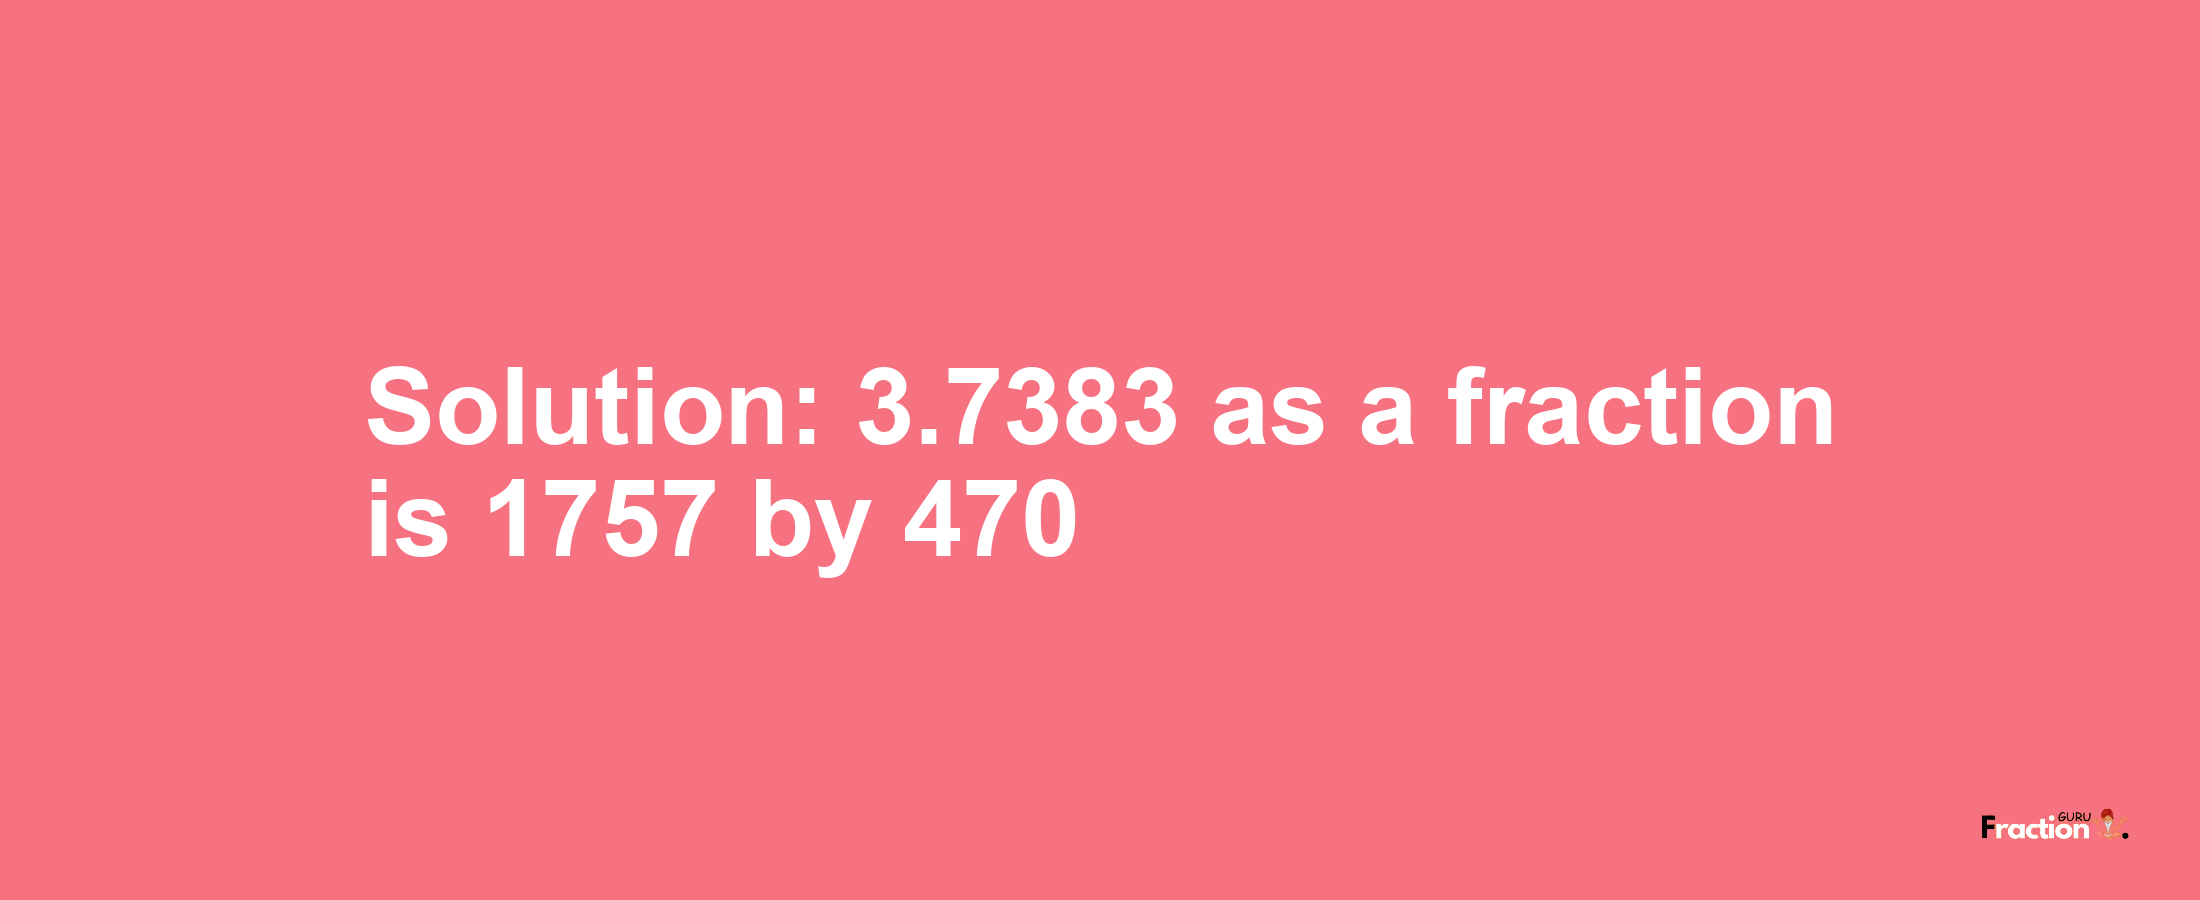 Solution:3.7383 as a fraction is 1757/470